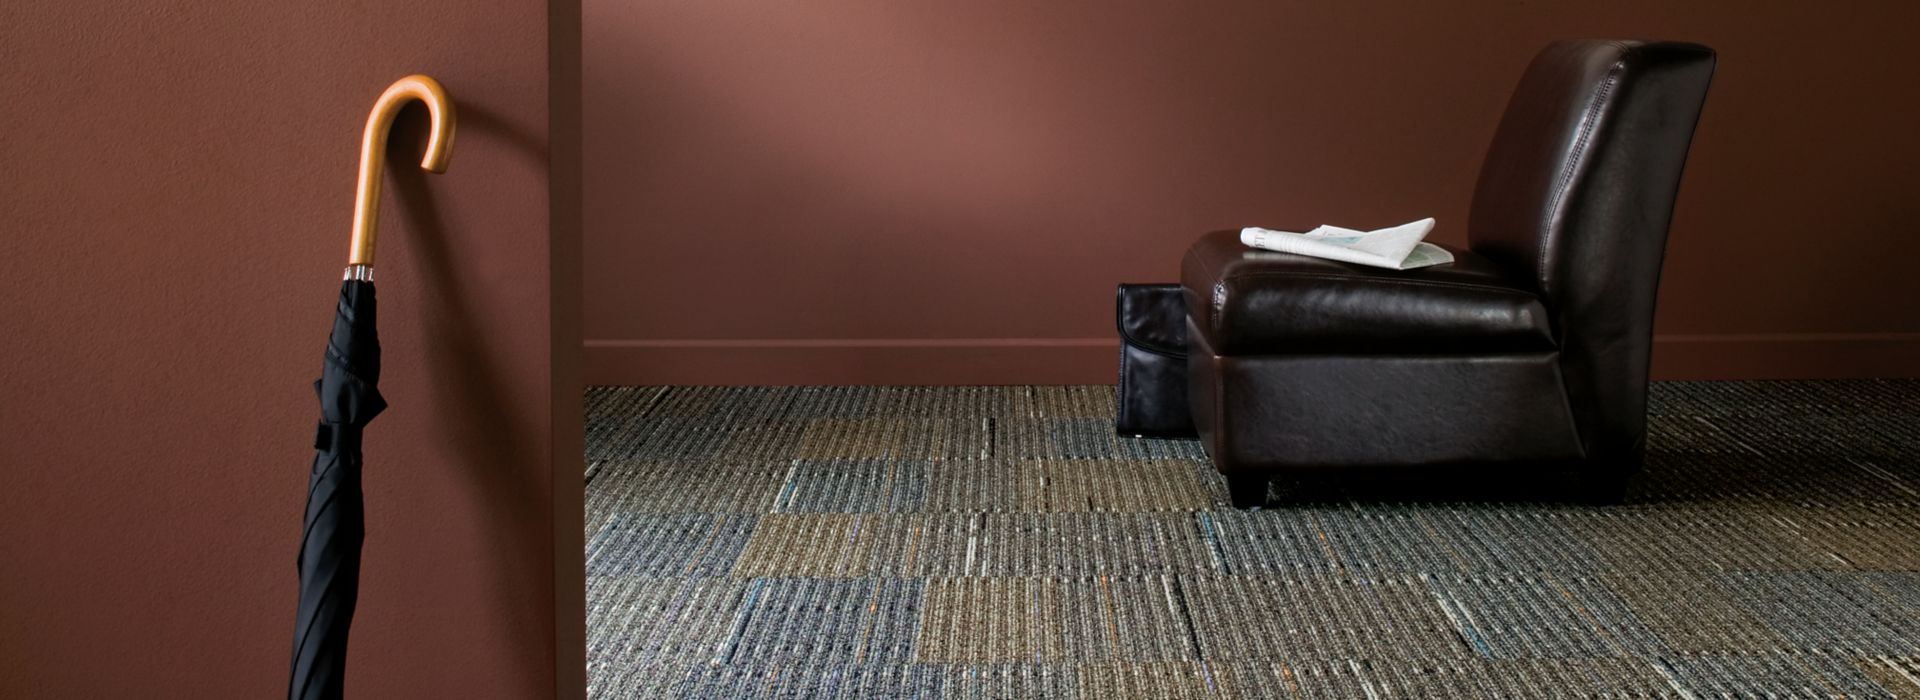 Interface Stroud II carpet tile with leather chair and umbrella numéro d’image 1